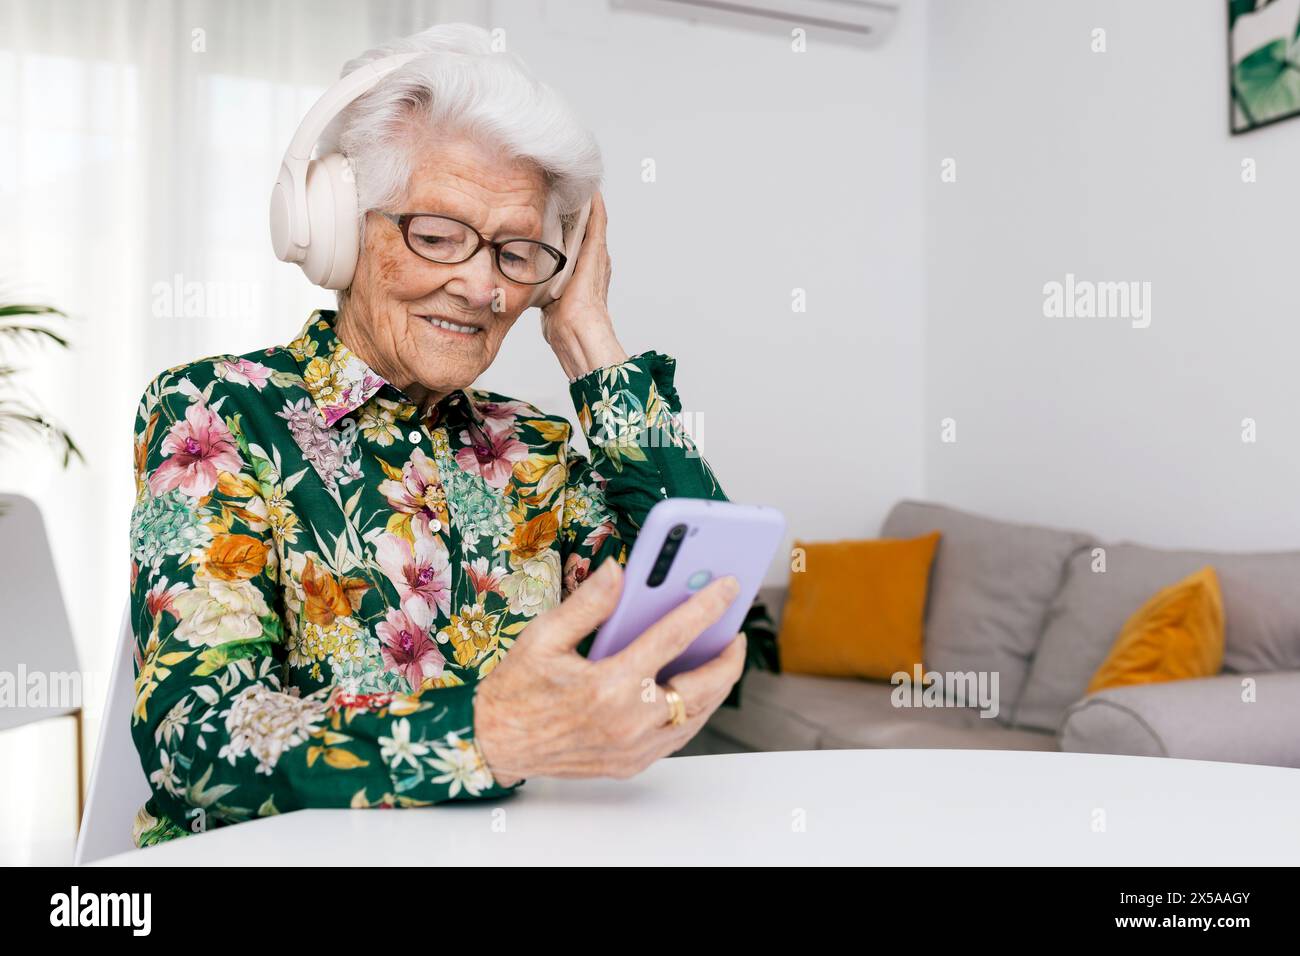 A joyful senior woman with white hair and glasses listens to music using headphones and a smartphone, comfortably seated indoors Stock Photo